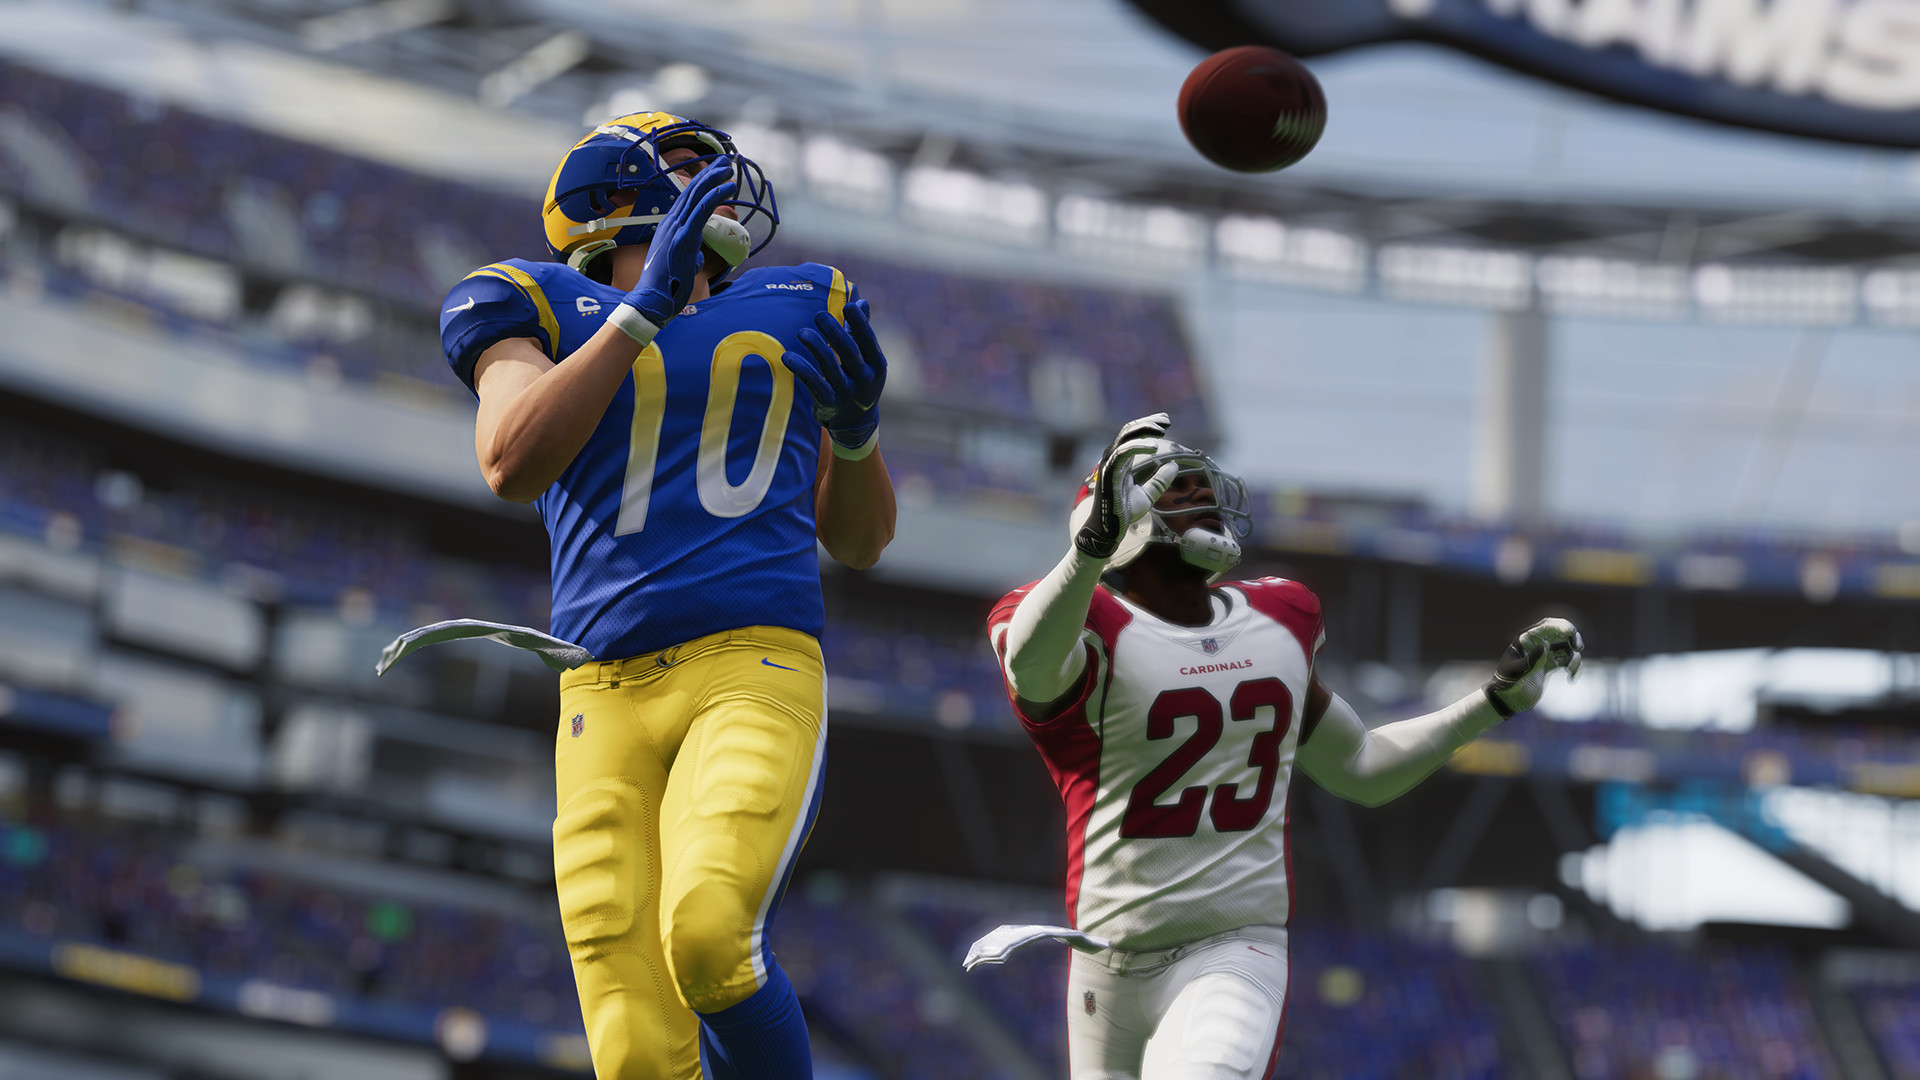 Madden 20 For PC Free Download